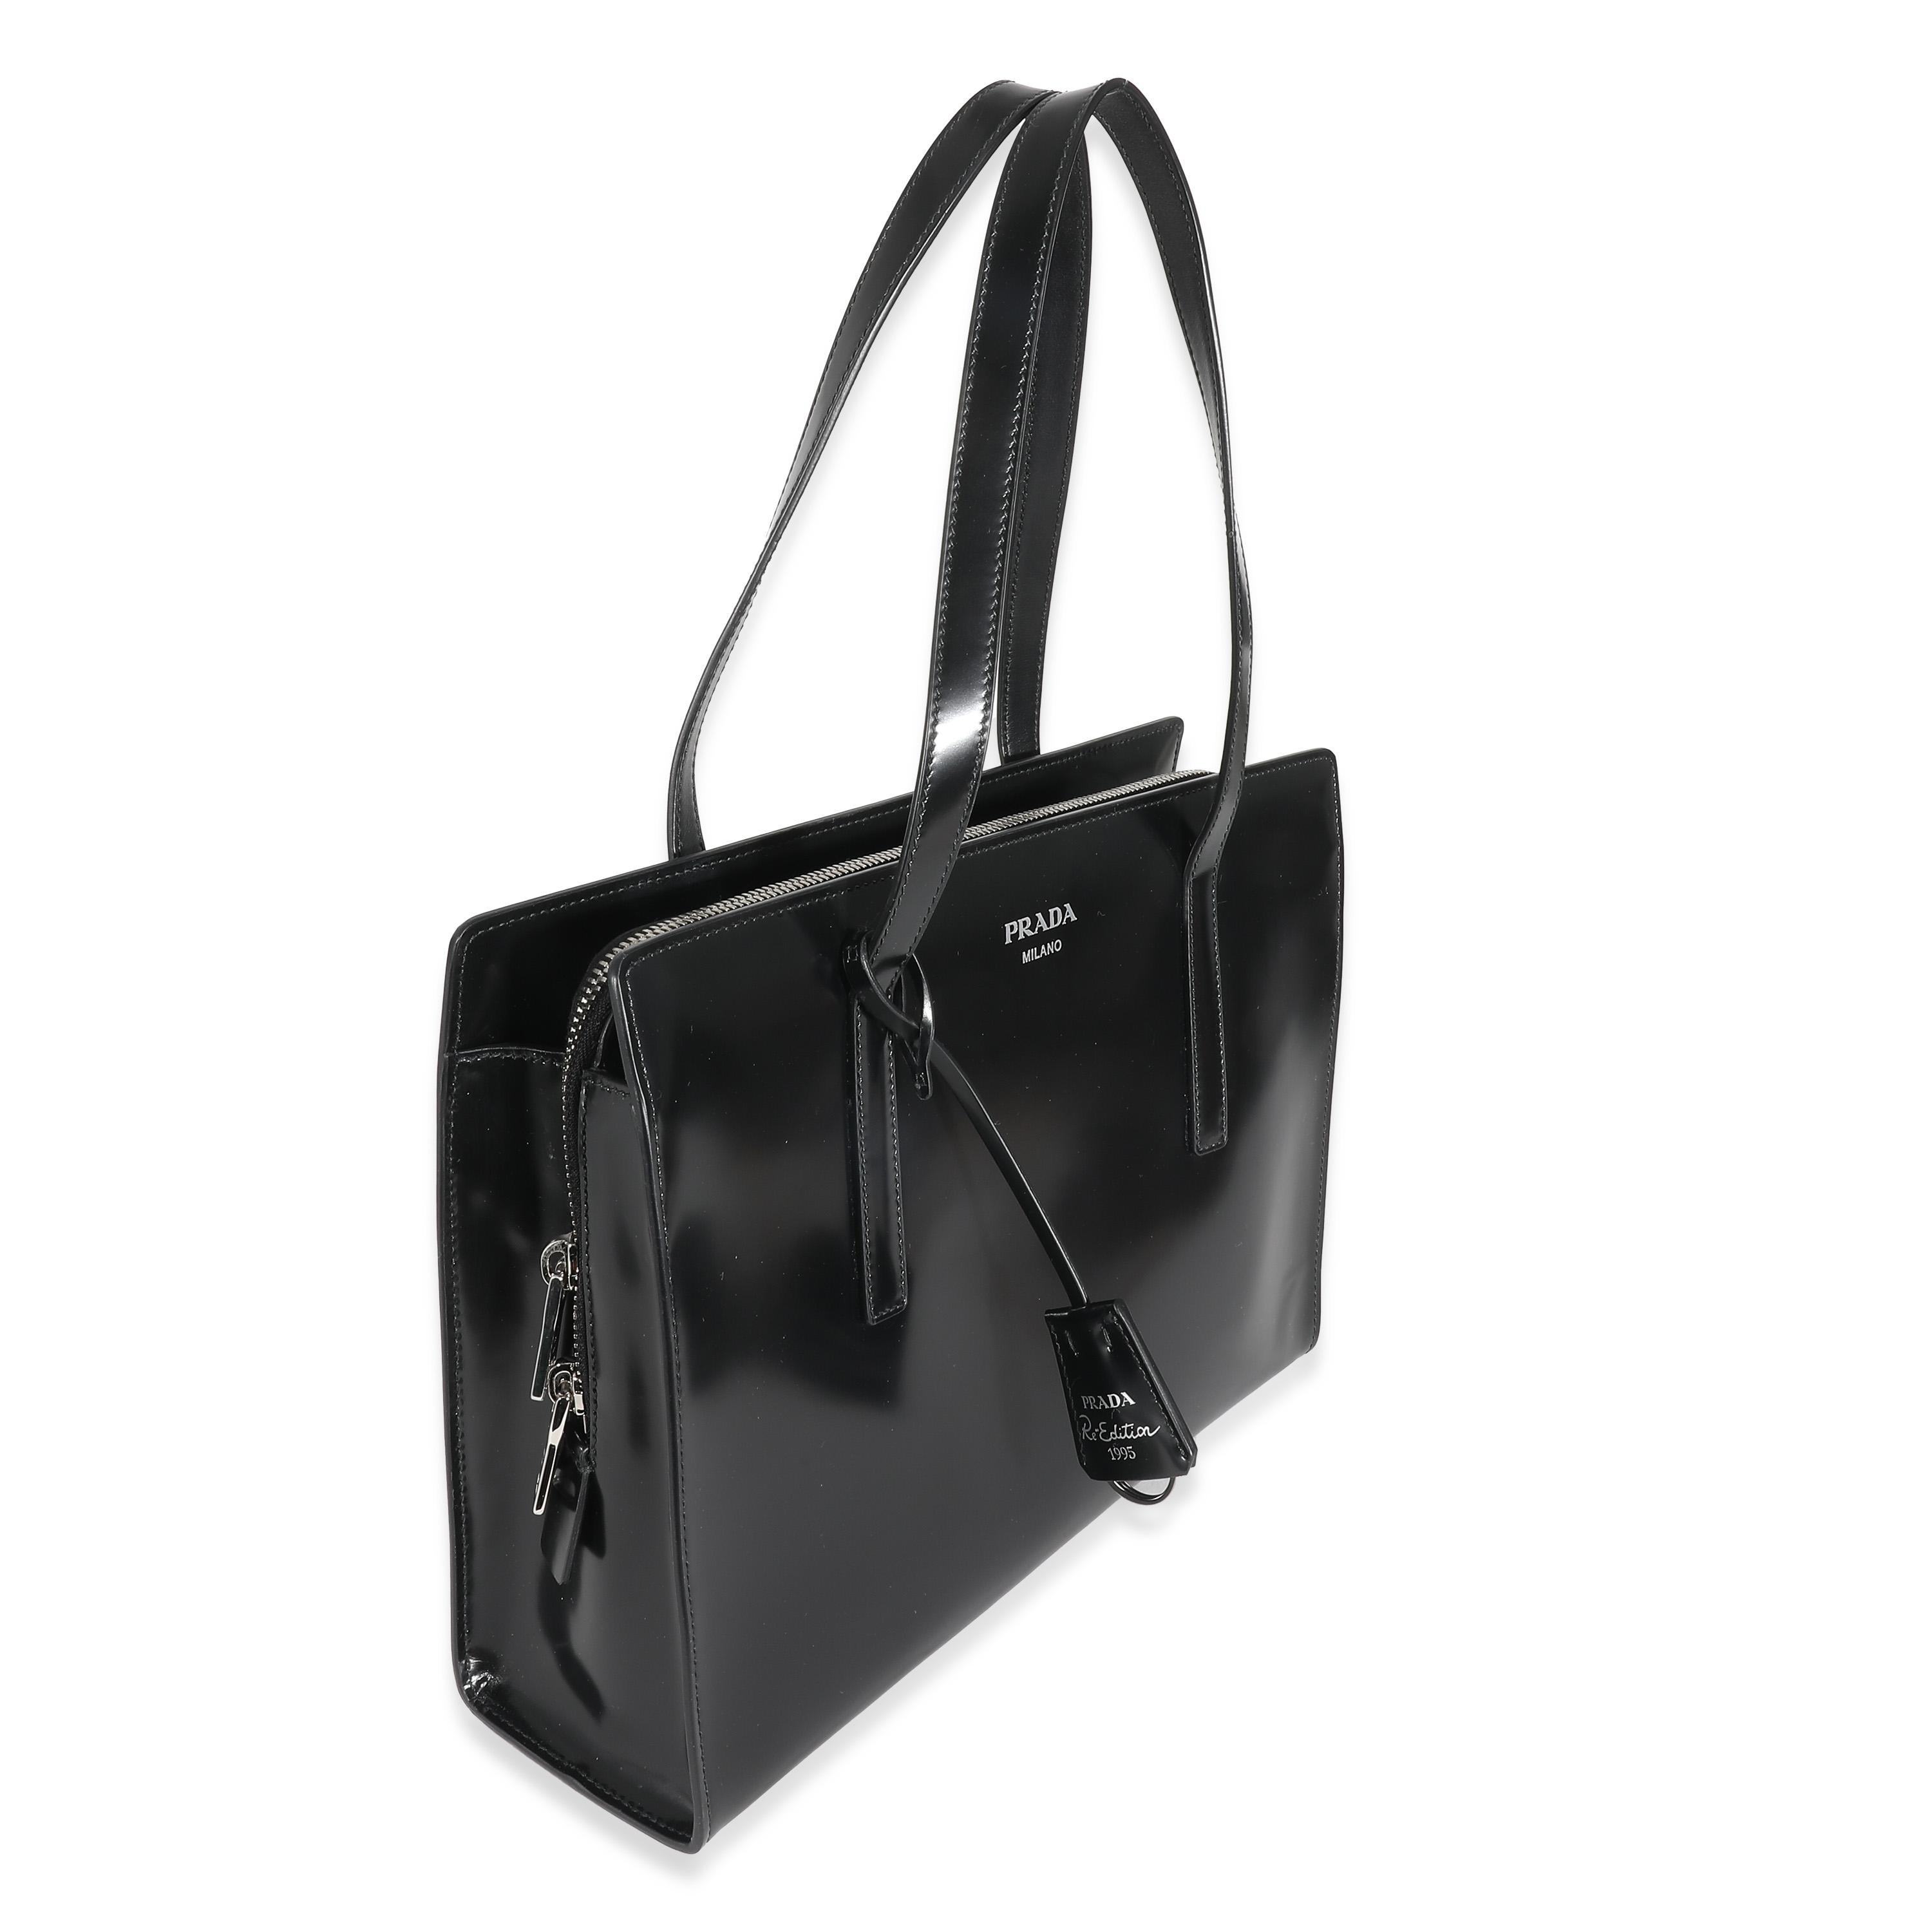 Listing Title: Prada Black Spazzolato Medium Re-Edition 1995
SKU: 134538
MSRP: 3800.00 USD
Condition: Pre-owned 
Handbag Condition: Excellent
Condition Comments: Item is in excellent condition and displays light signs of wear. Mild scuffing along